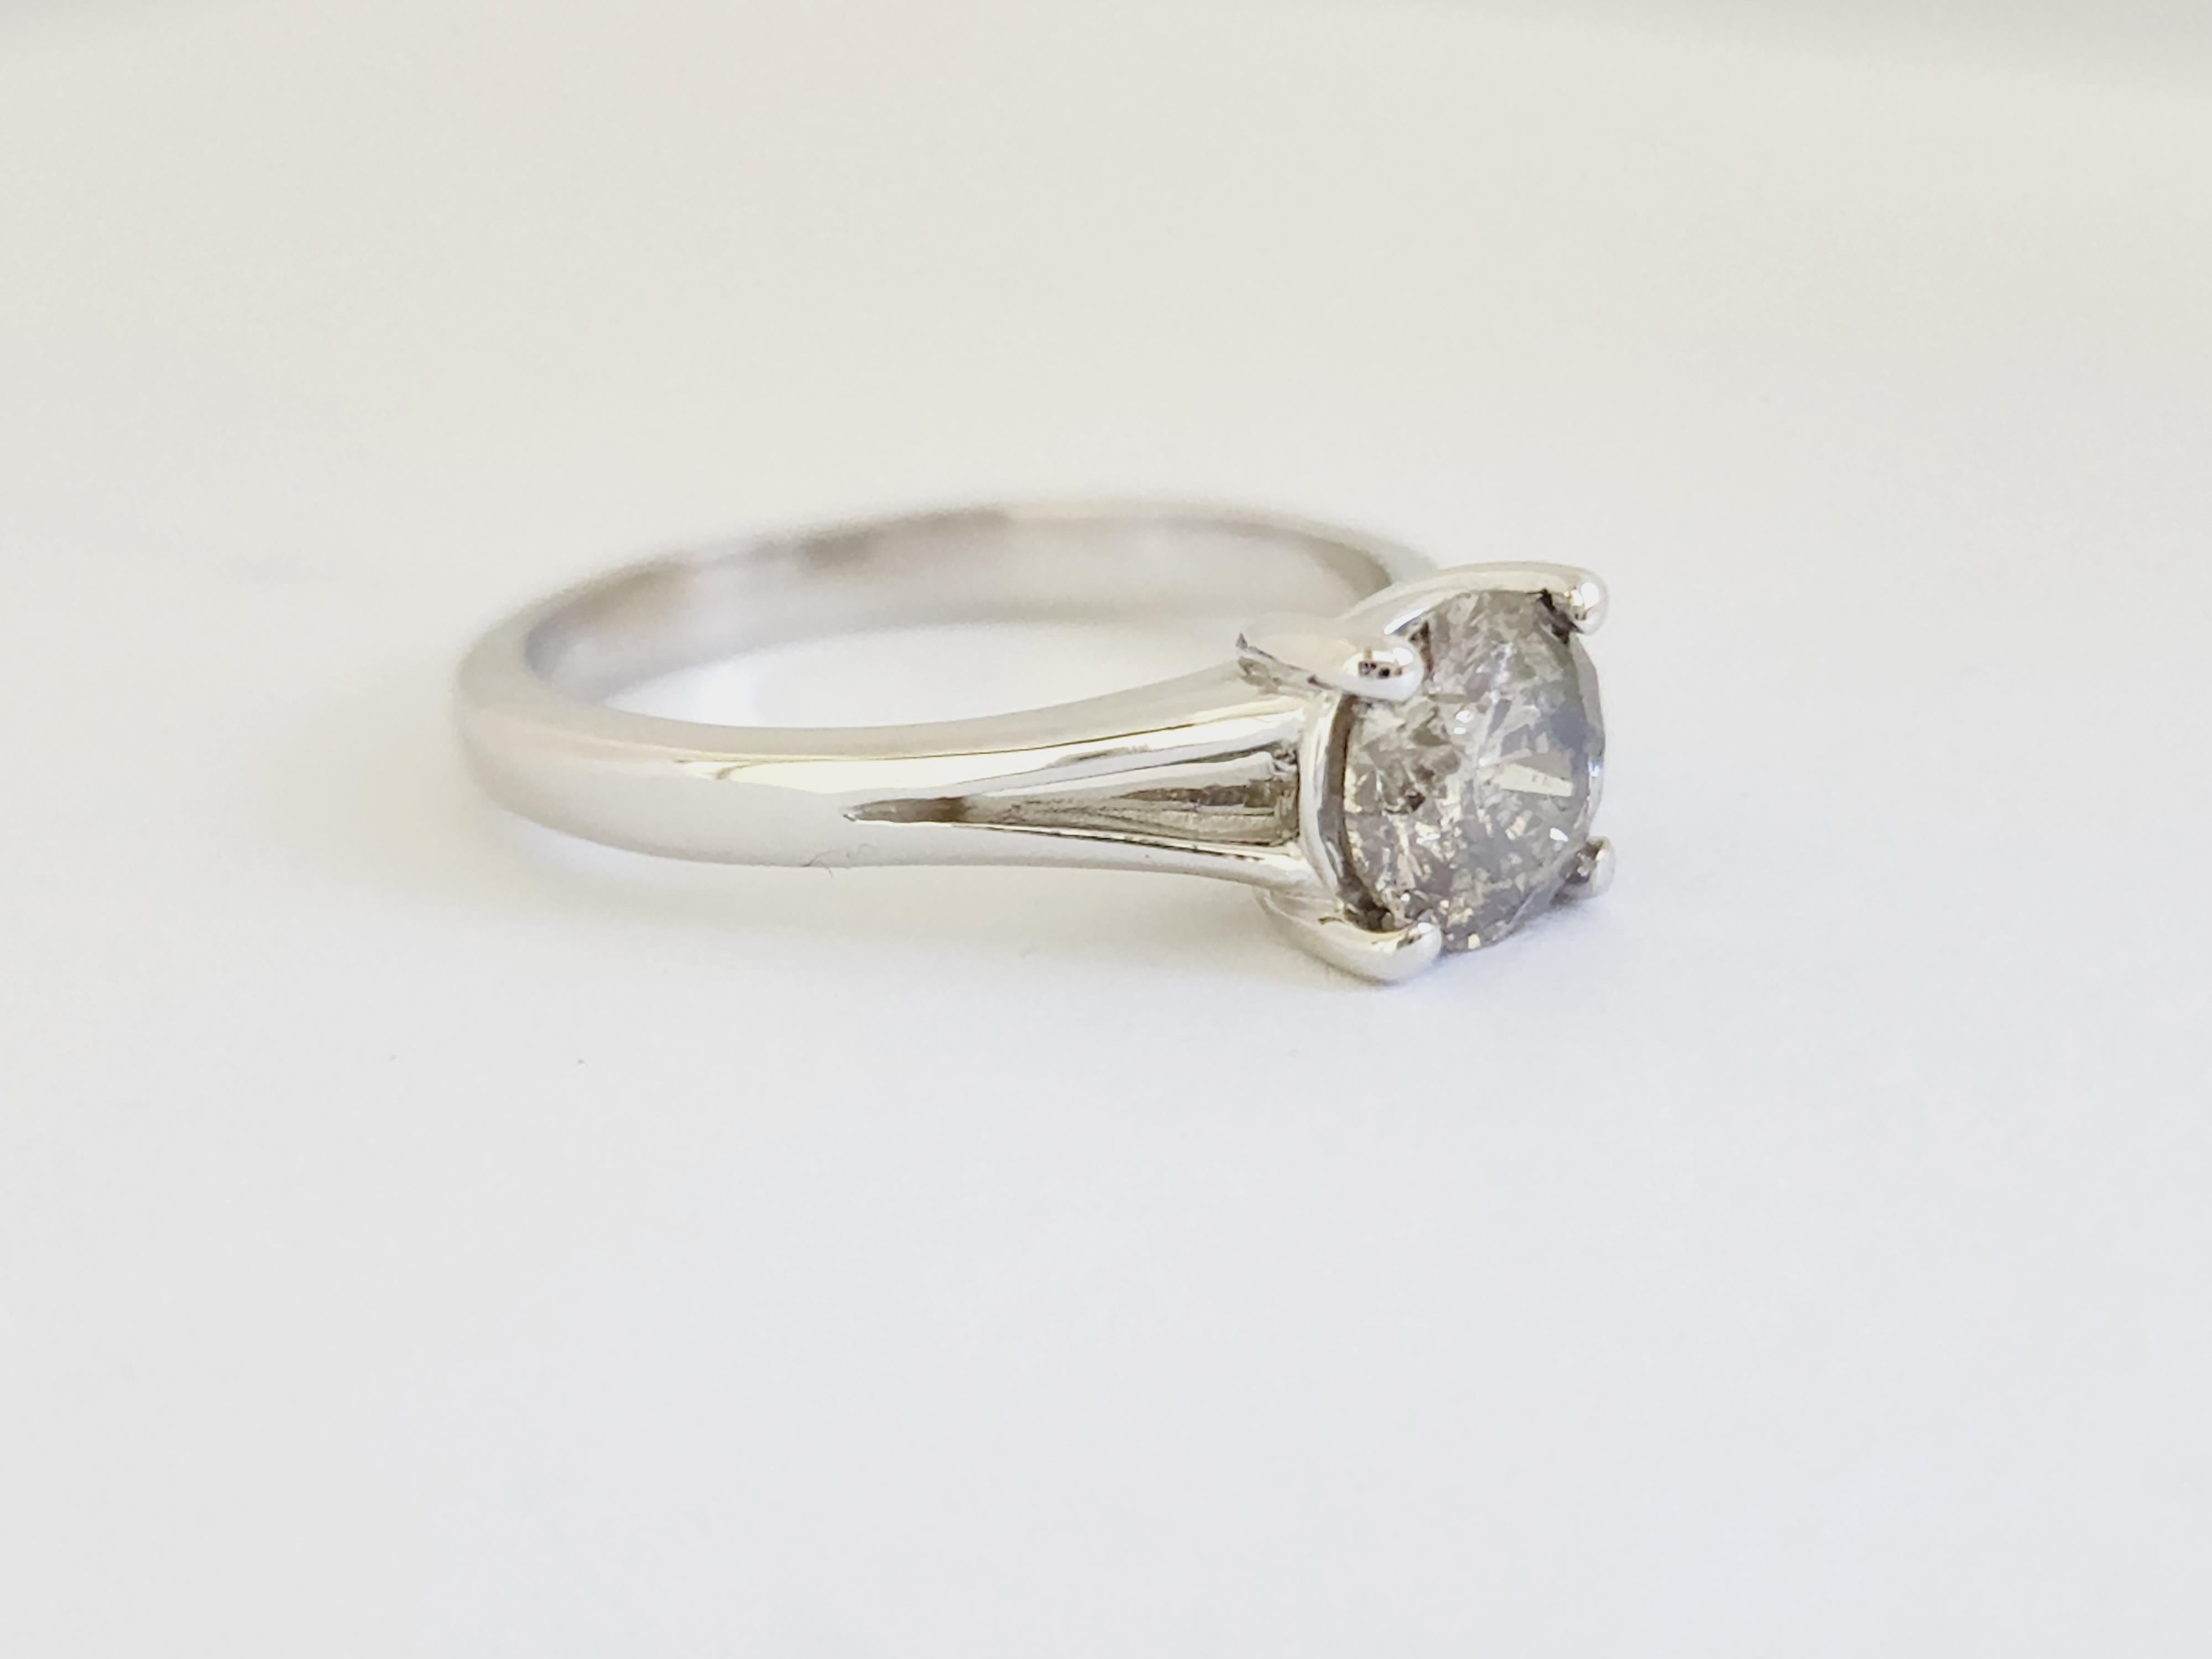 IGI 1.01 Carat Natural Grayish Brown Round Diamond Ring 14 Karat White Gold In New Condition For Sale In Great Neck, NY